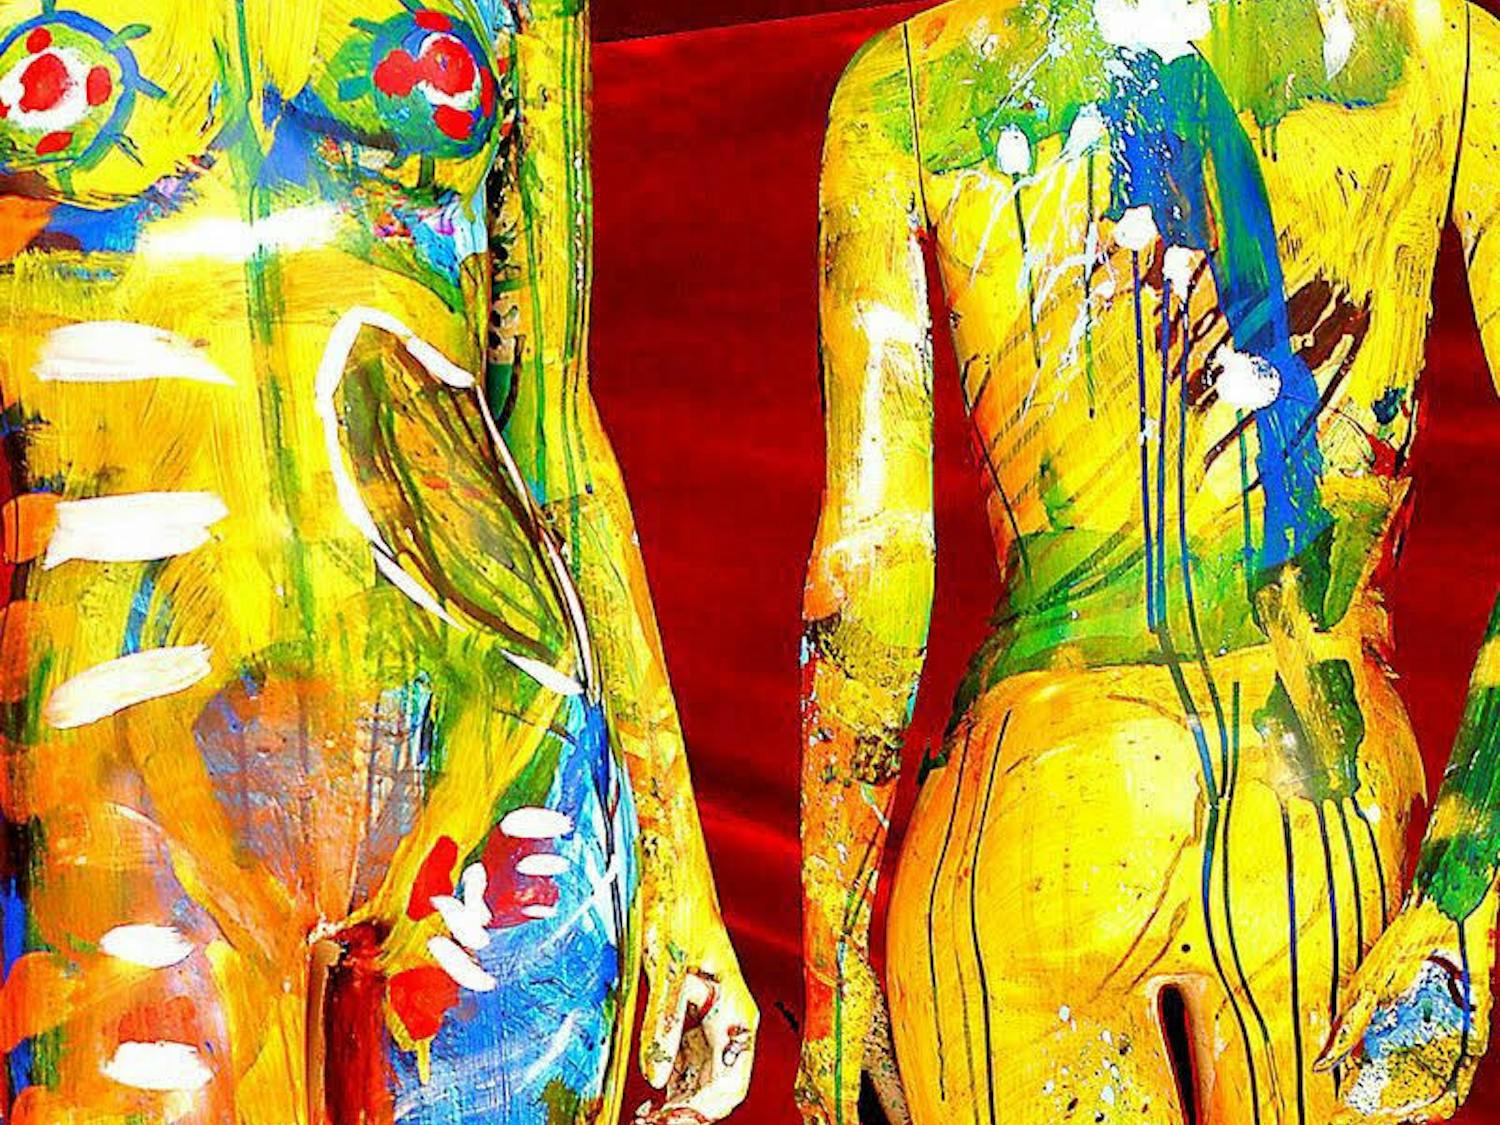 Second-hand mannequins were turned into artwork for an exhibition entitled 'Artists Supporting Pride -- Rainbow Spirits.' Proceeds from the show will go toward funding future Pride events.